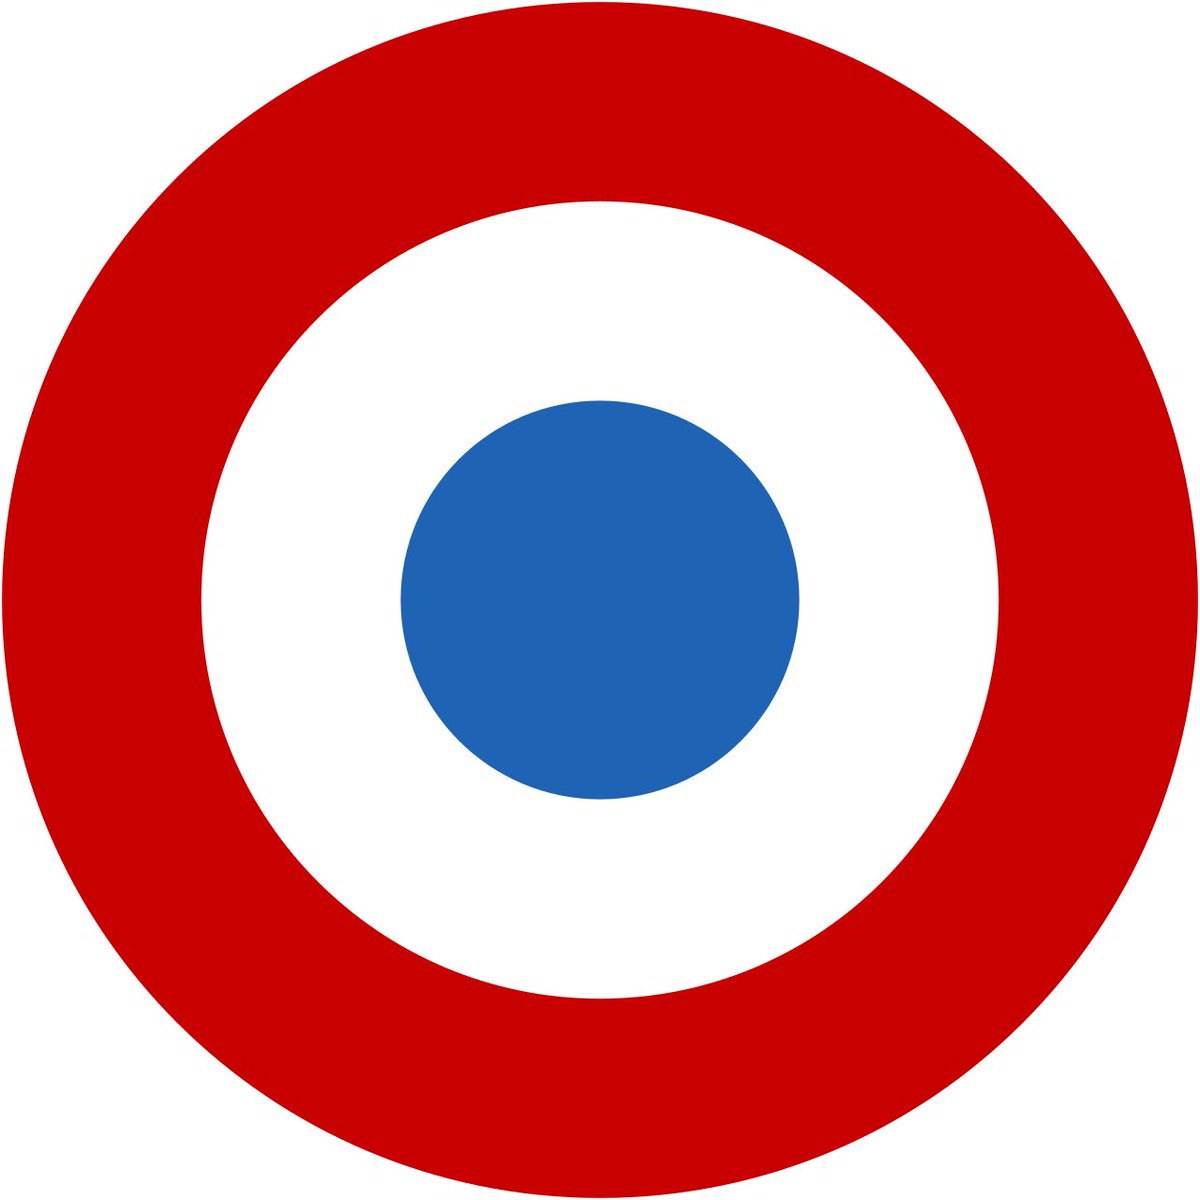 France: the classic. paint Republican cockade on your planes and then everyone else copies it in ways that make no fucking sense